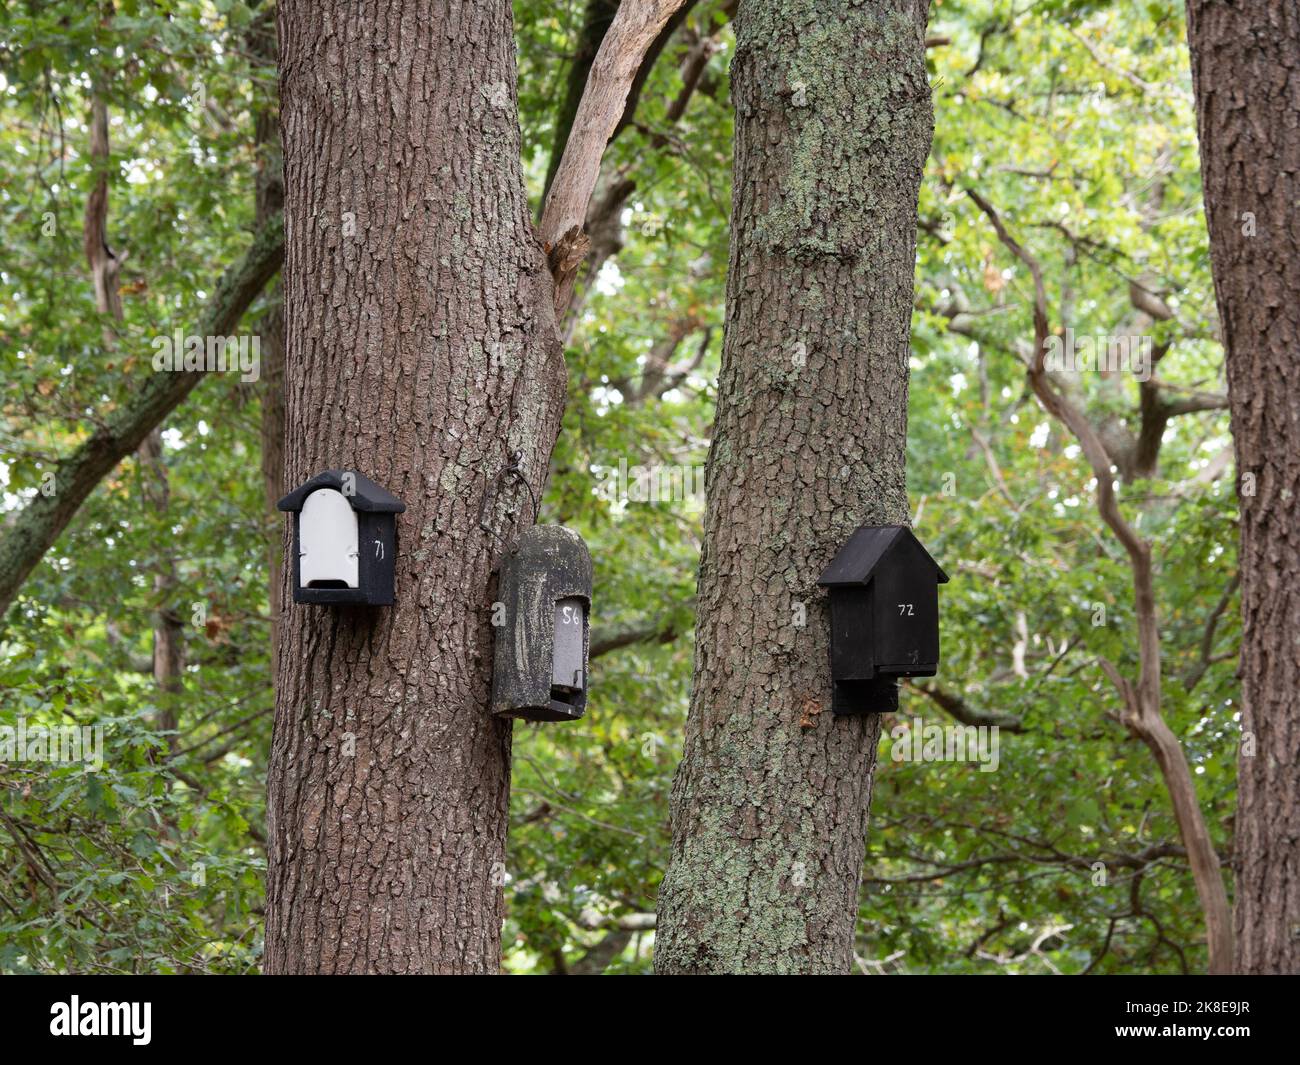 Numbered bird boxes on trees Stock Photo